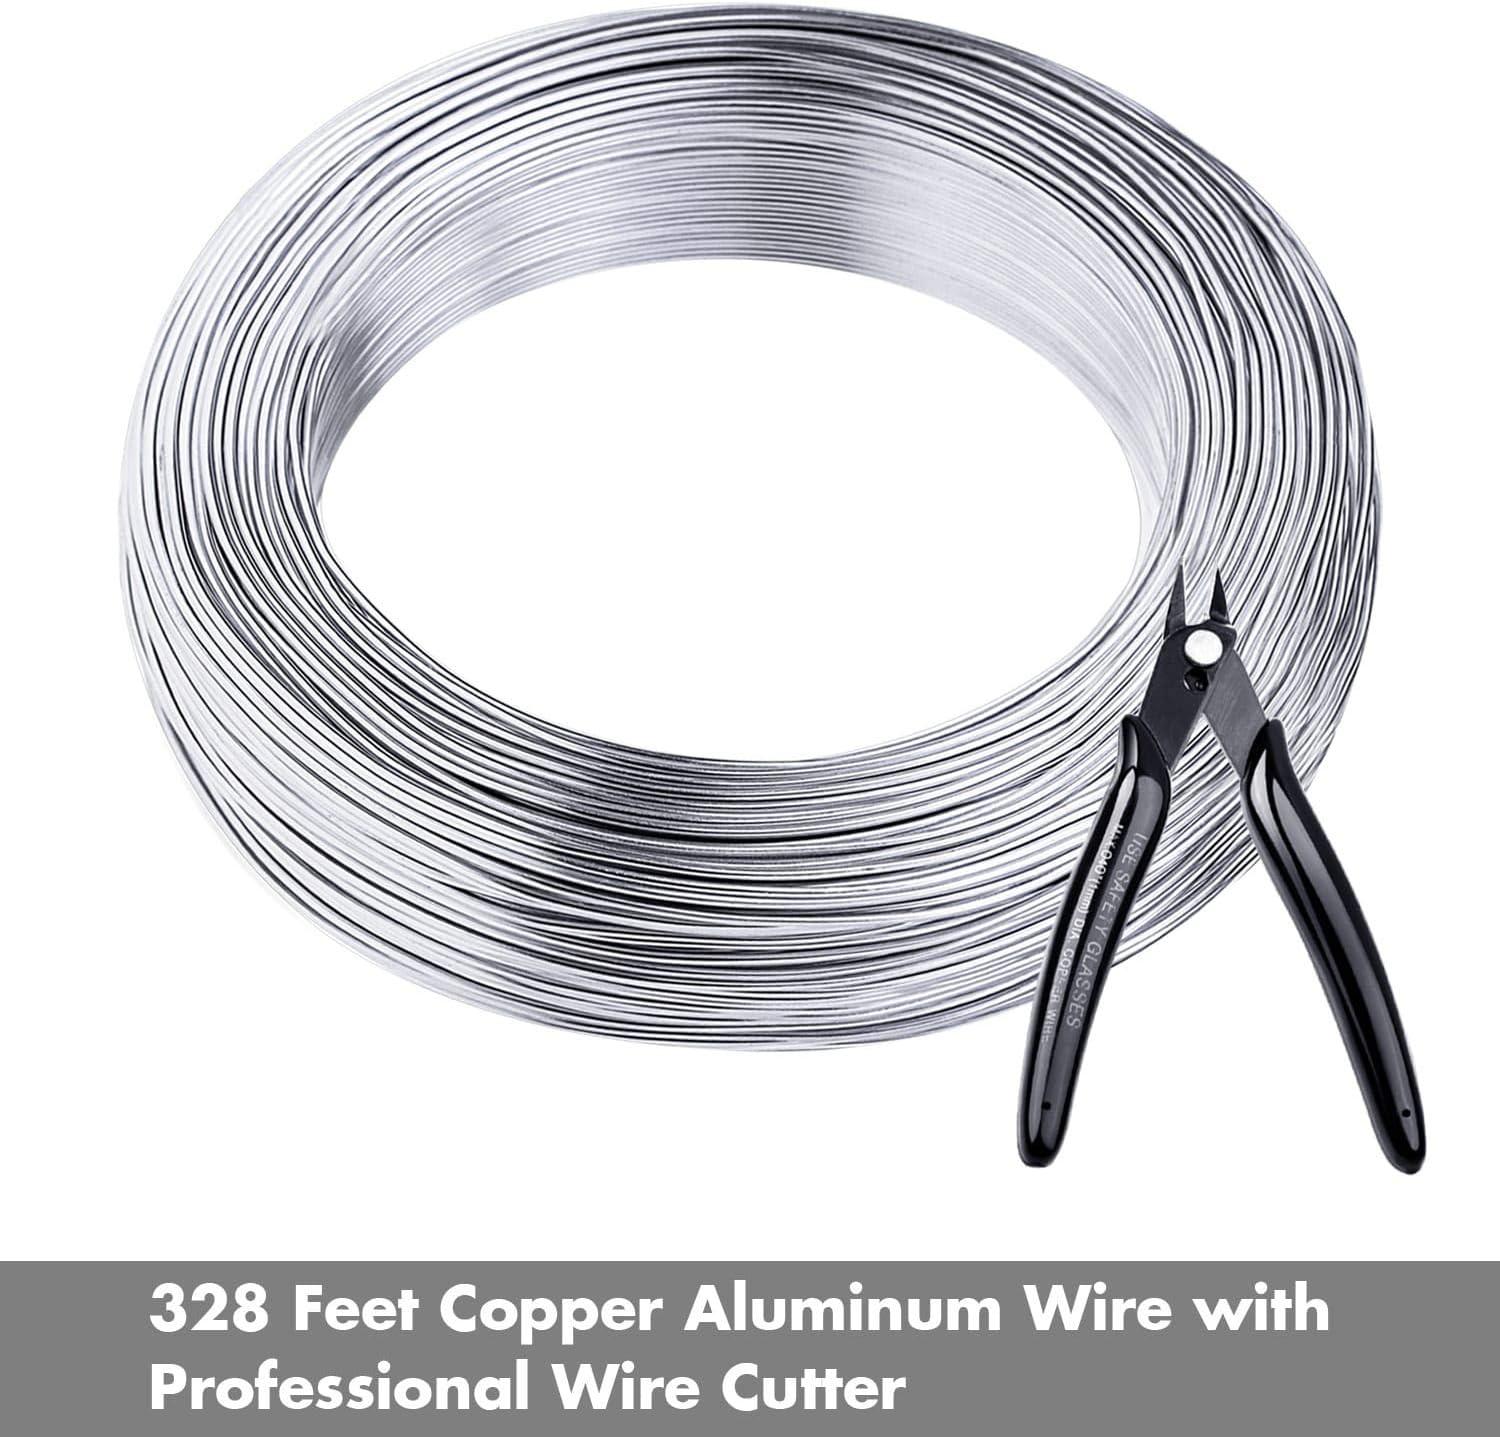 Aluminum Wire, Anezus 18 Gauge 328 FT Metal Wire Bendable Sculpting  Aluminum Wire 1mm for Crafts Jewelry Making Beading Floral (Silver)  aluminum wire with cutter(18 gauge)